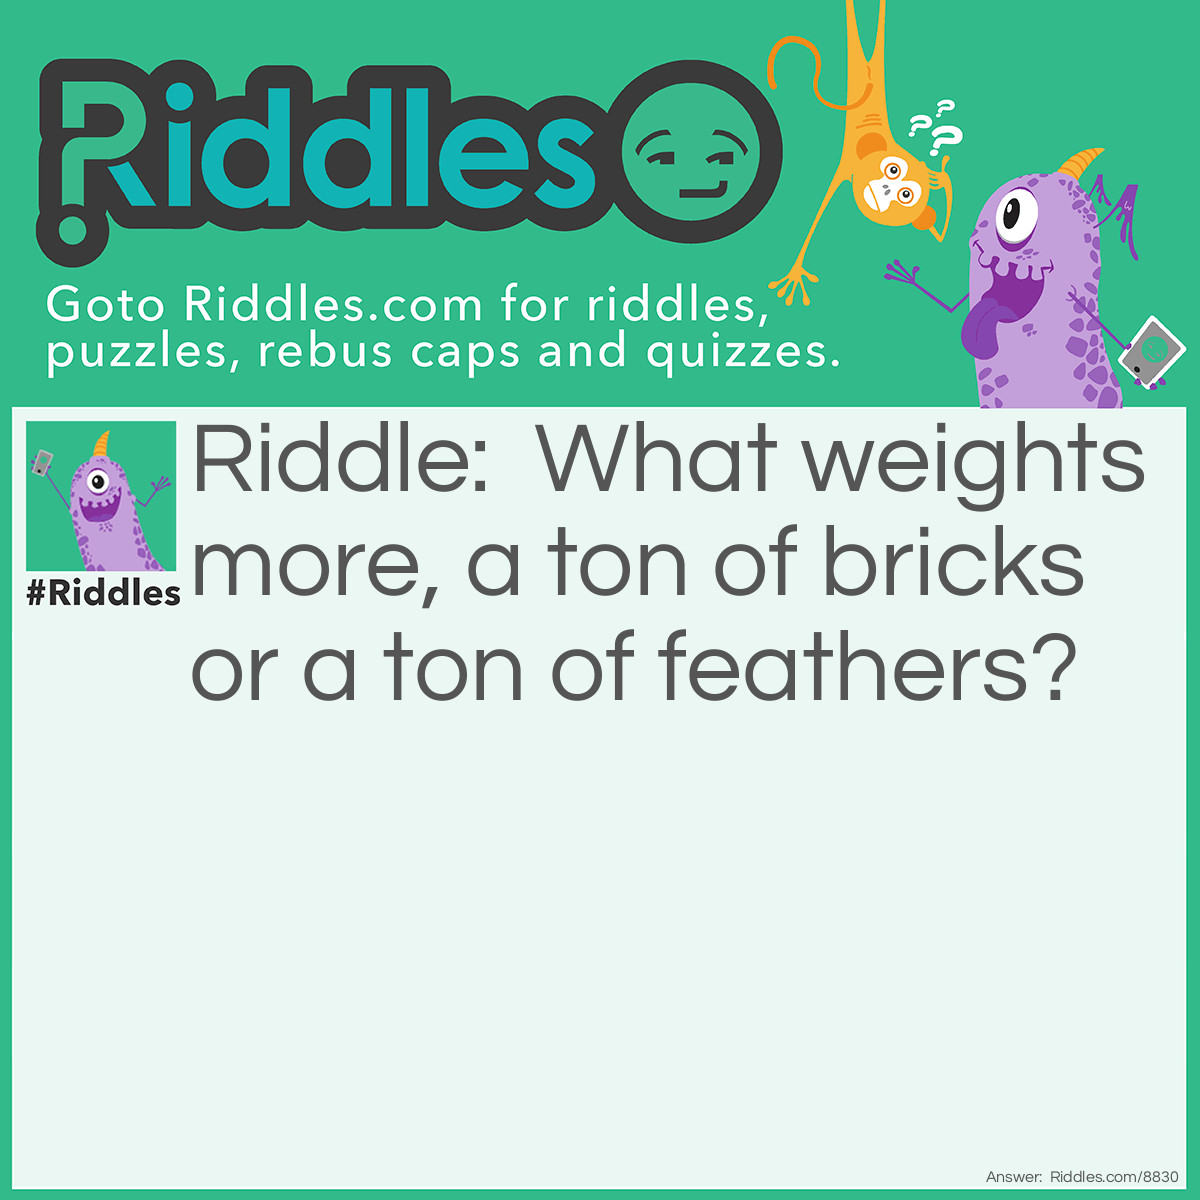 Riddle: What weights more, a ton of bricks or a ton of feathers? Answer: They both weight a ton!